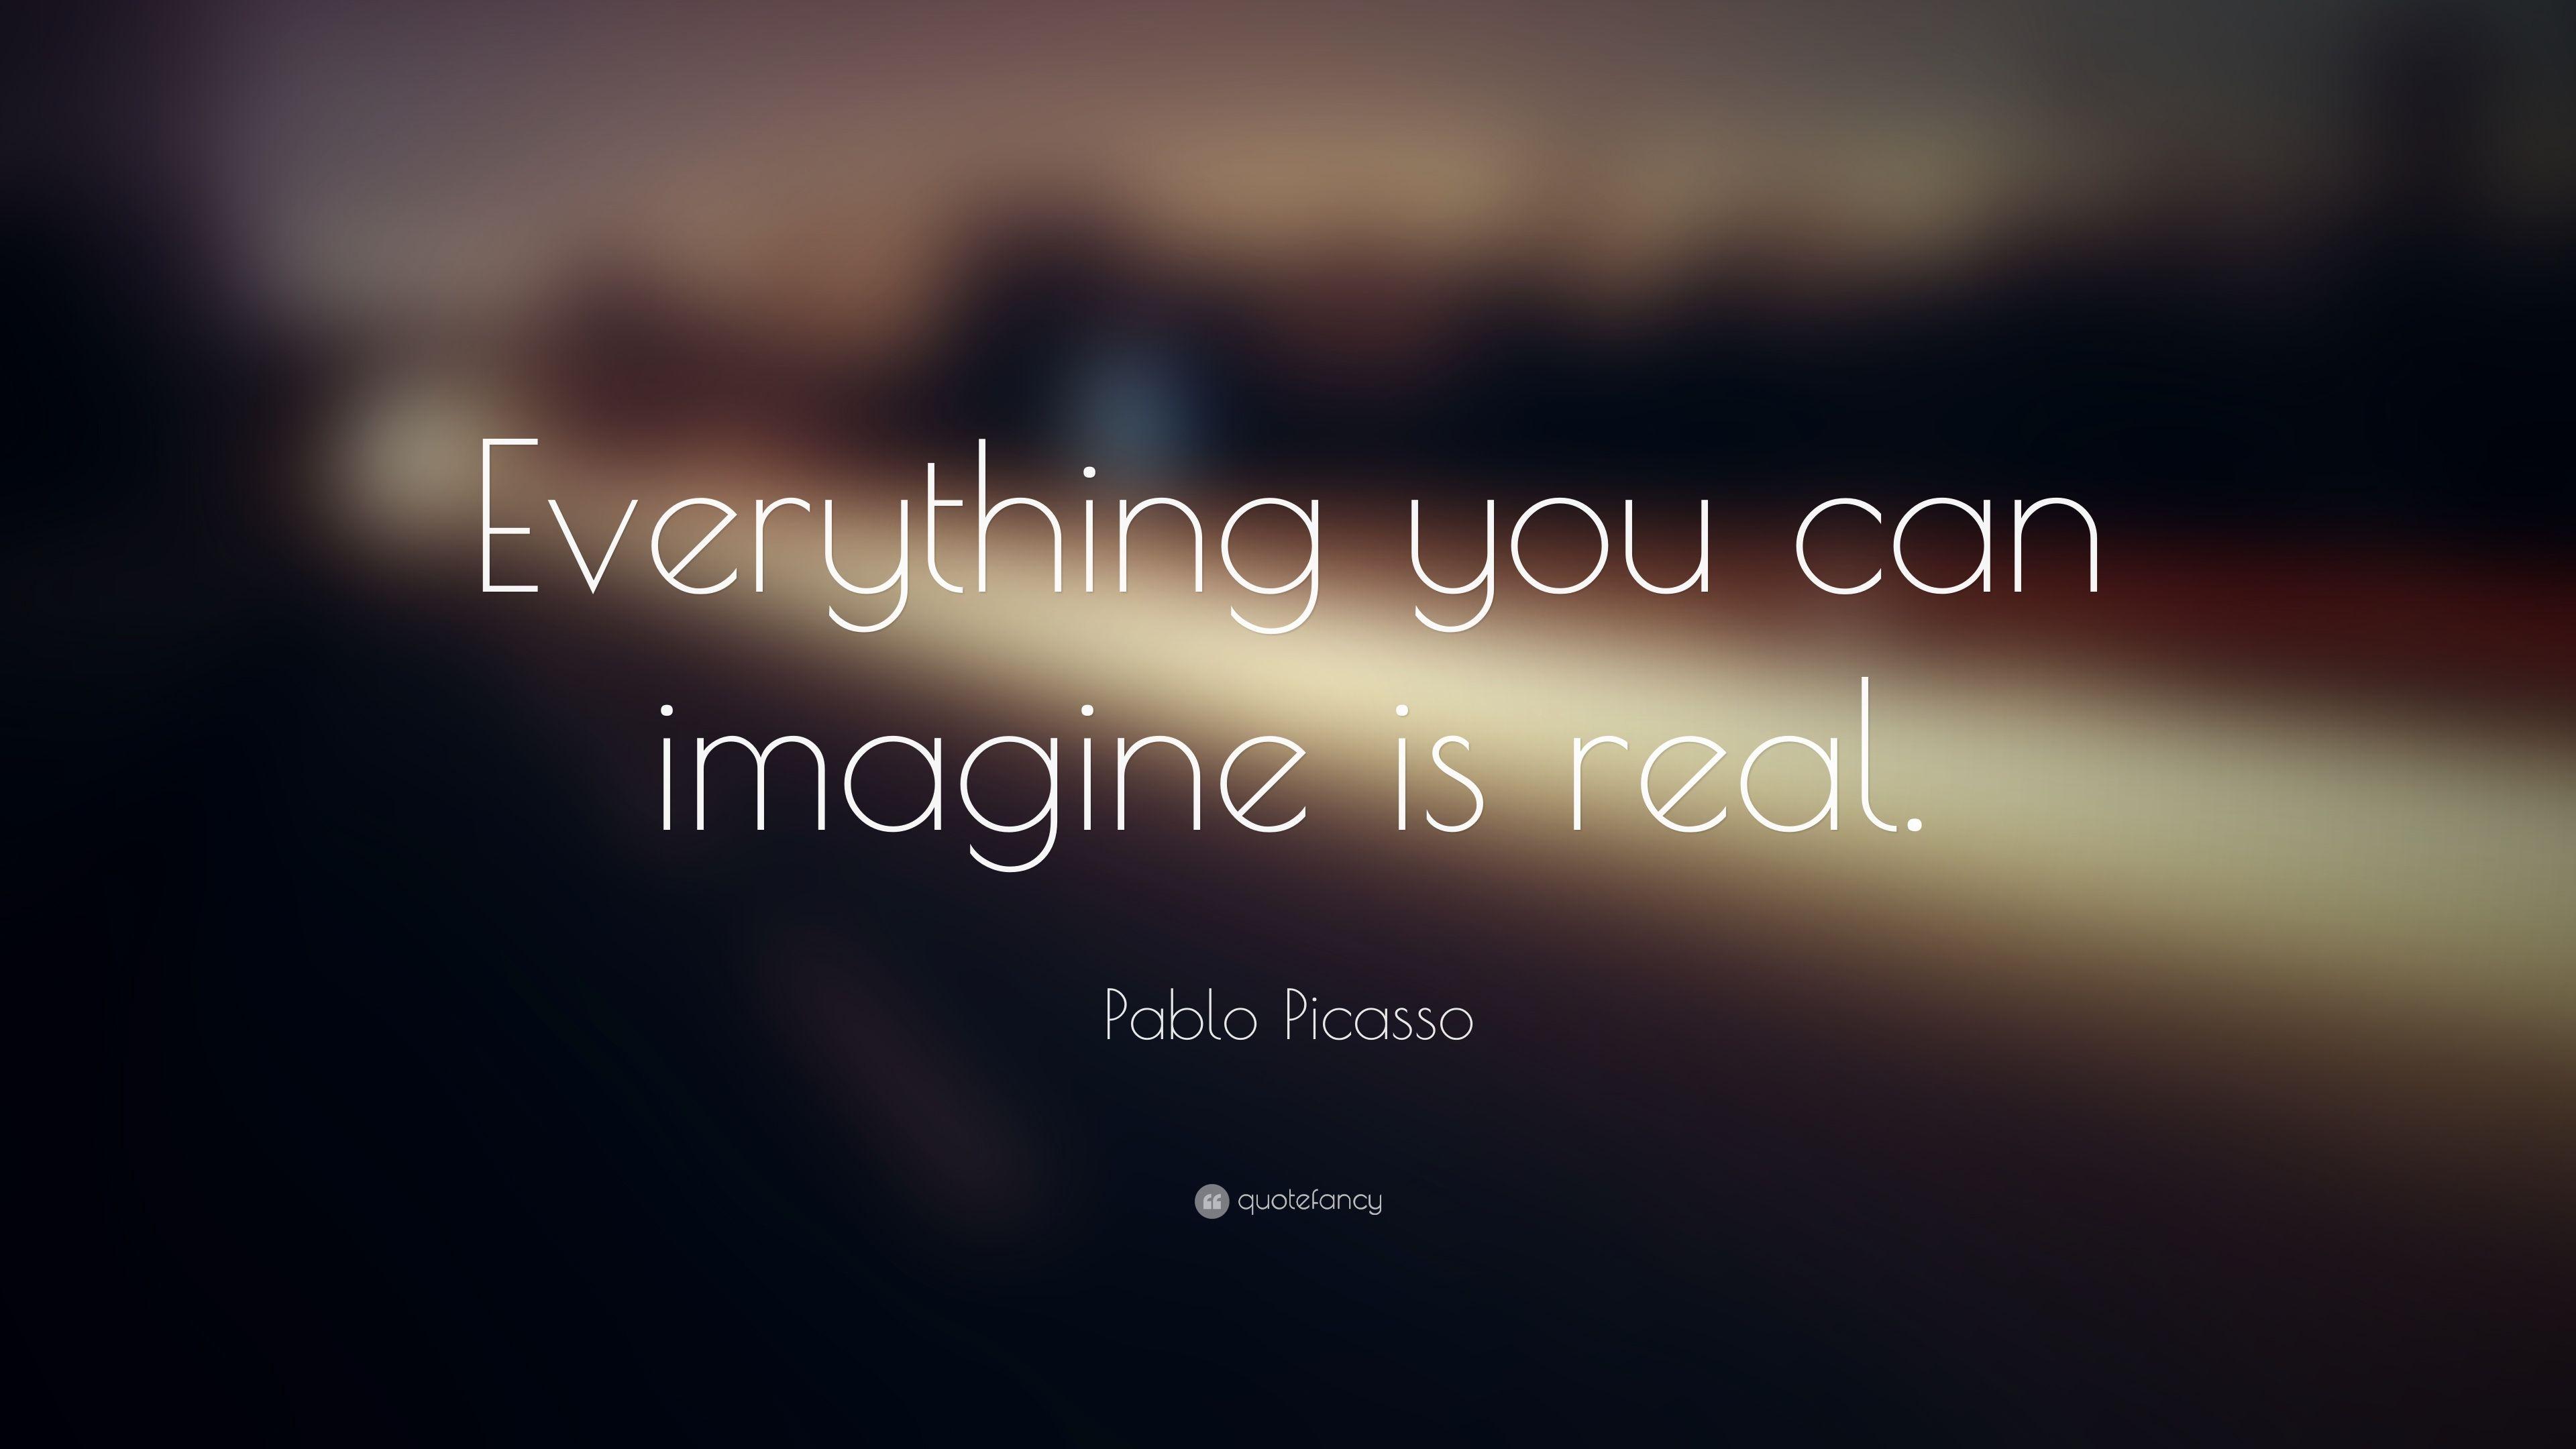 Pablo Picasso Quote: “Everything you can imagine is real.” 25